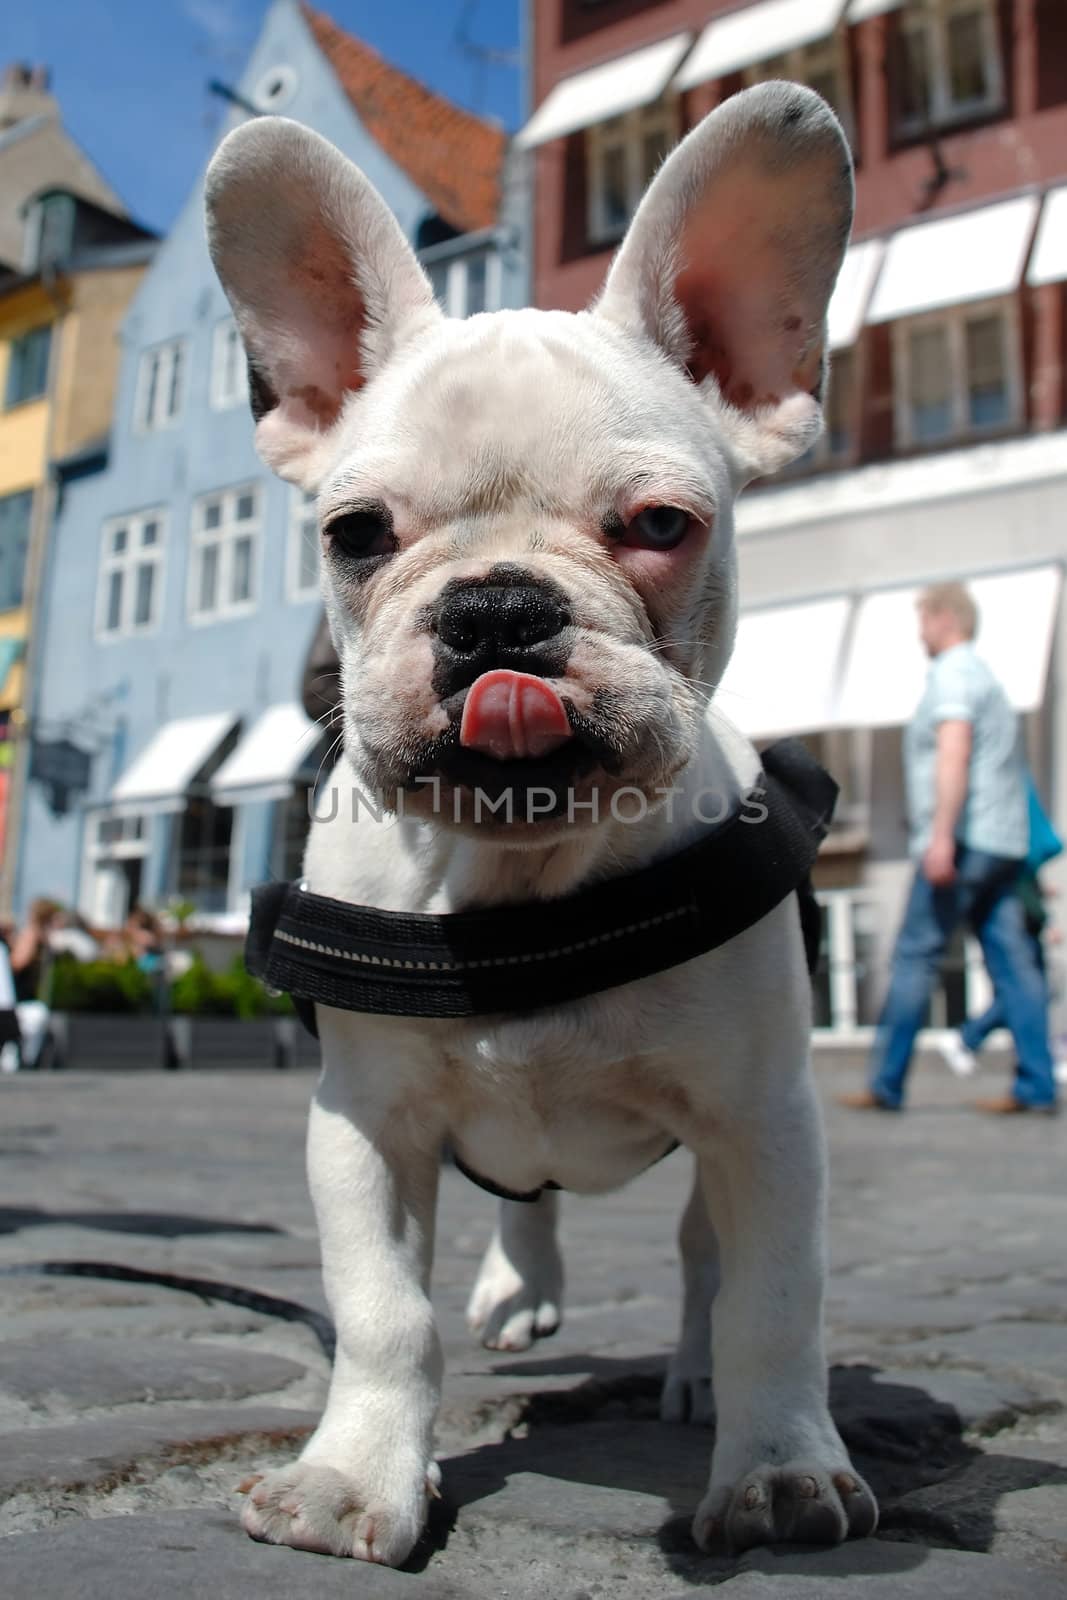 French booldog is showing its tongue